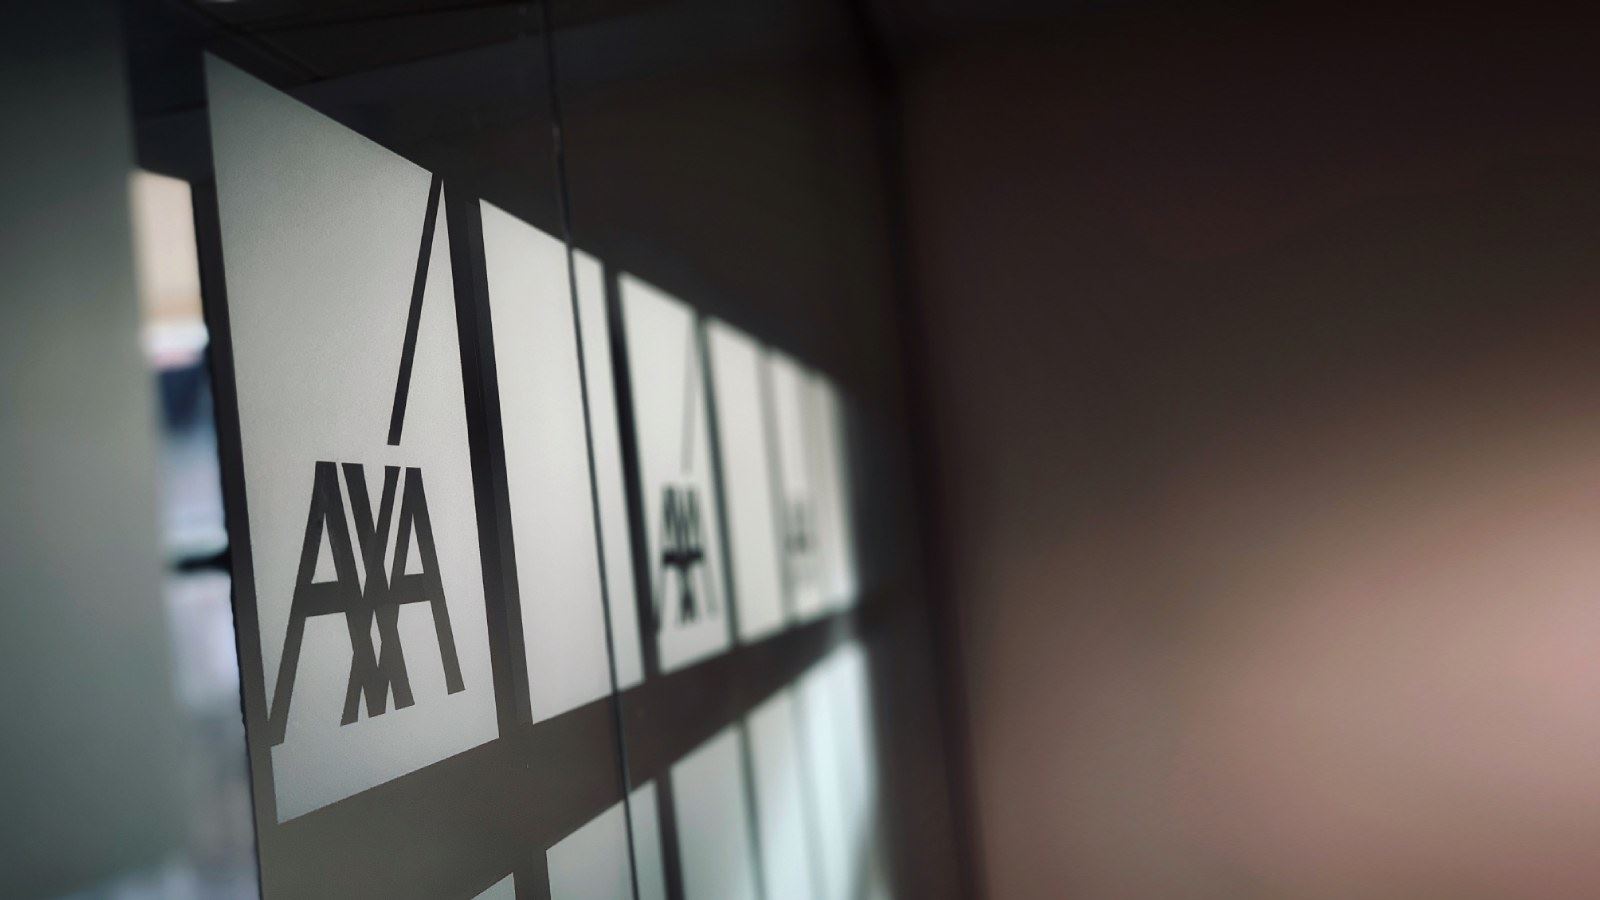 AXA logos etched on glass